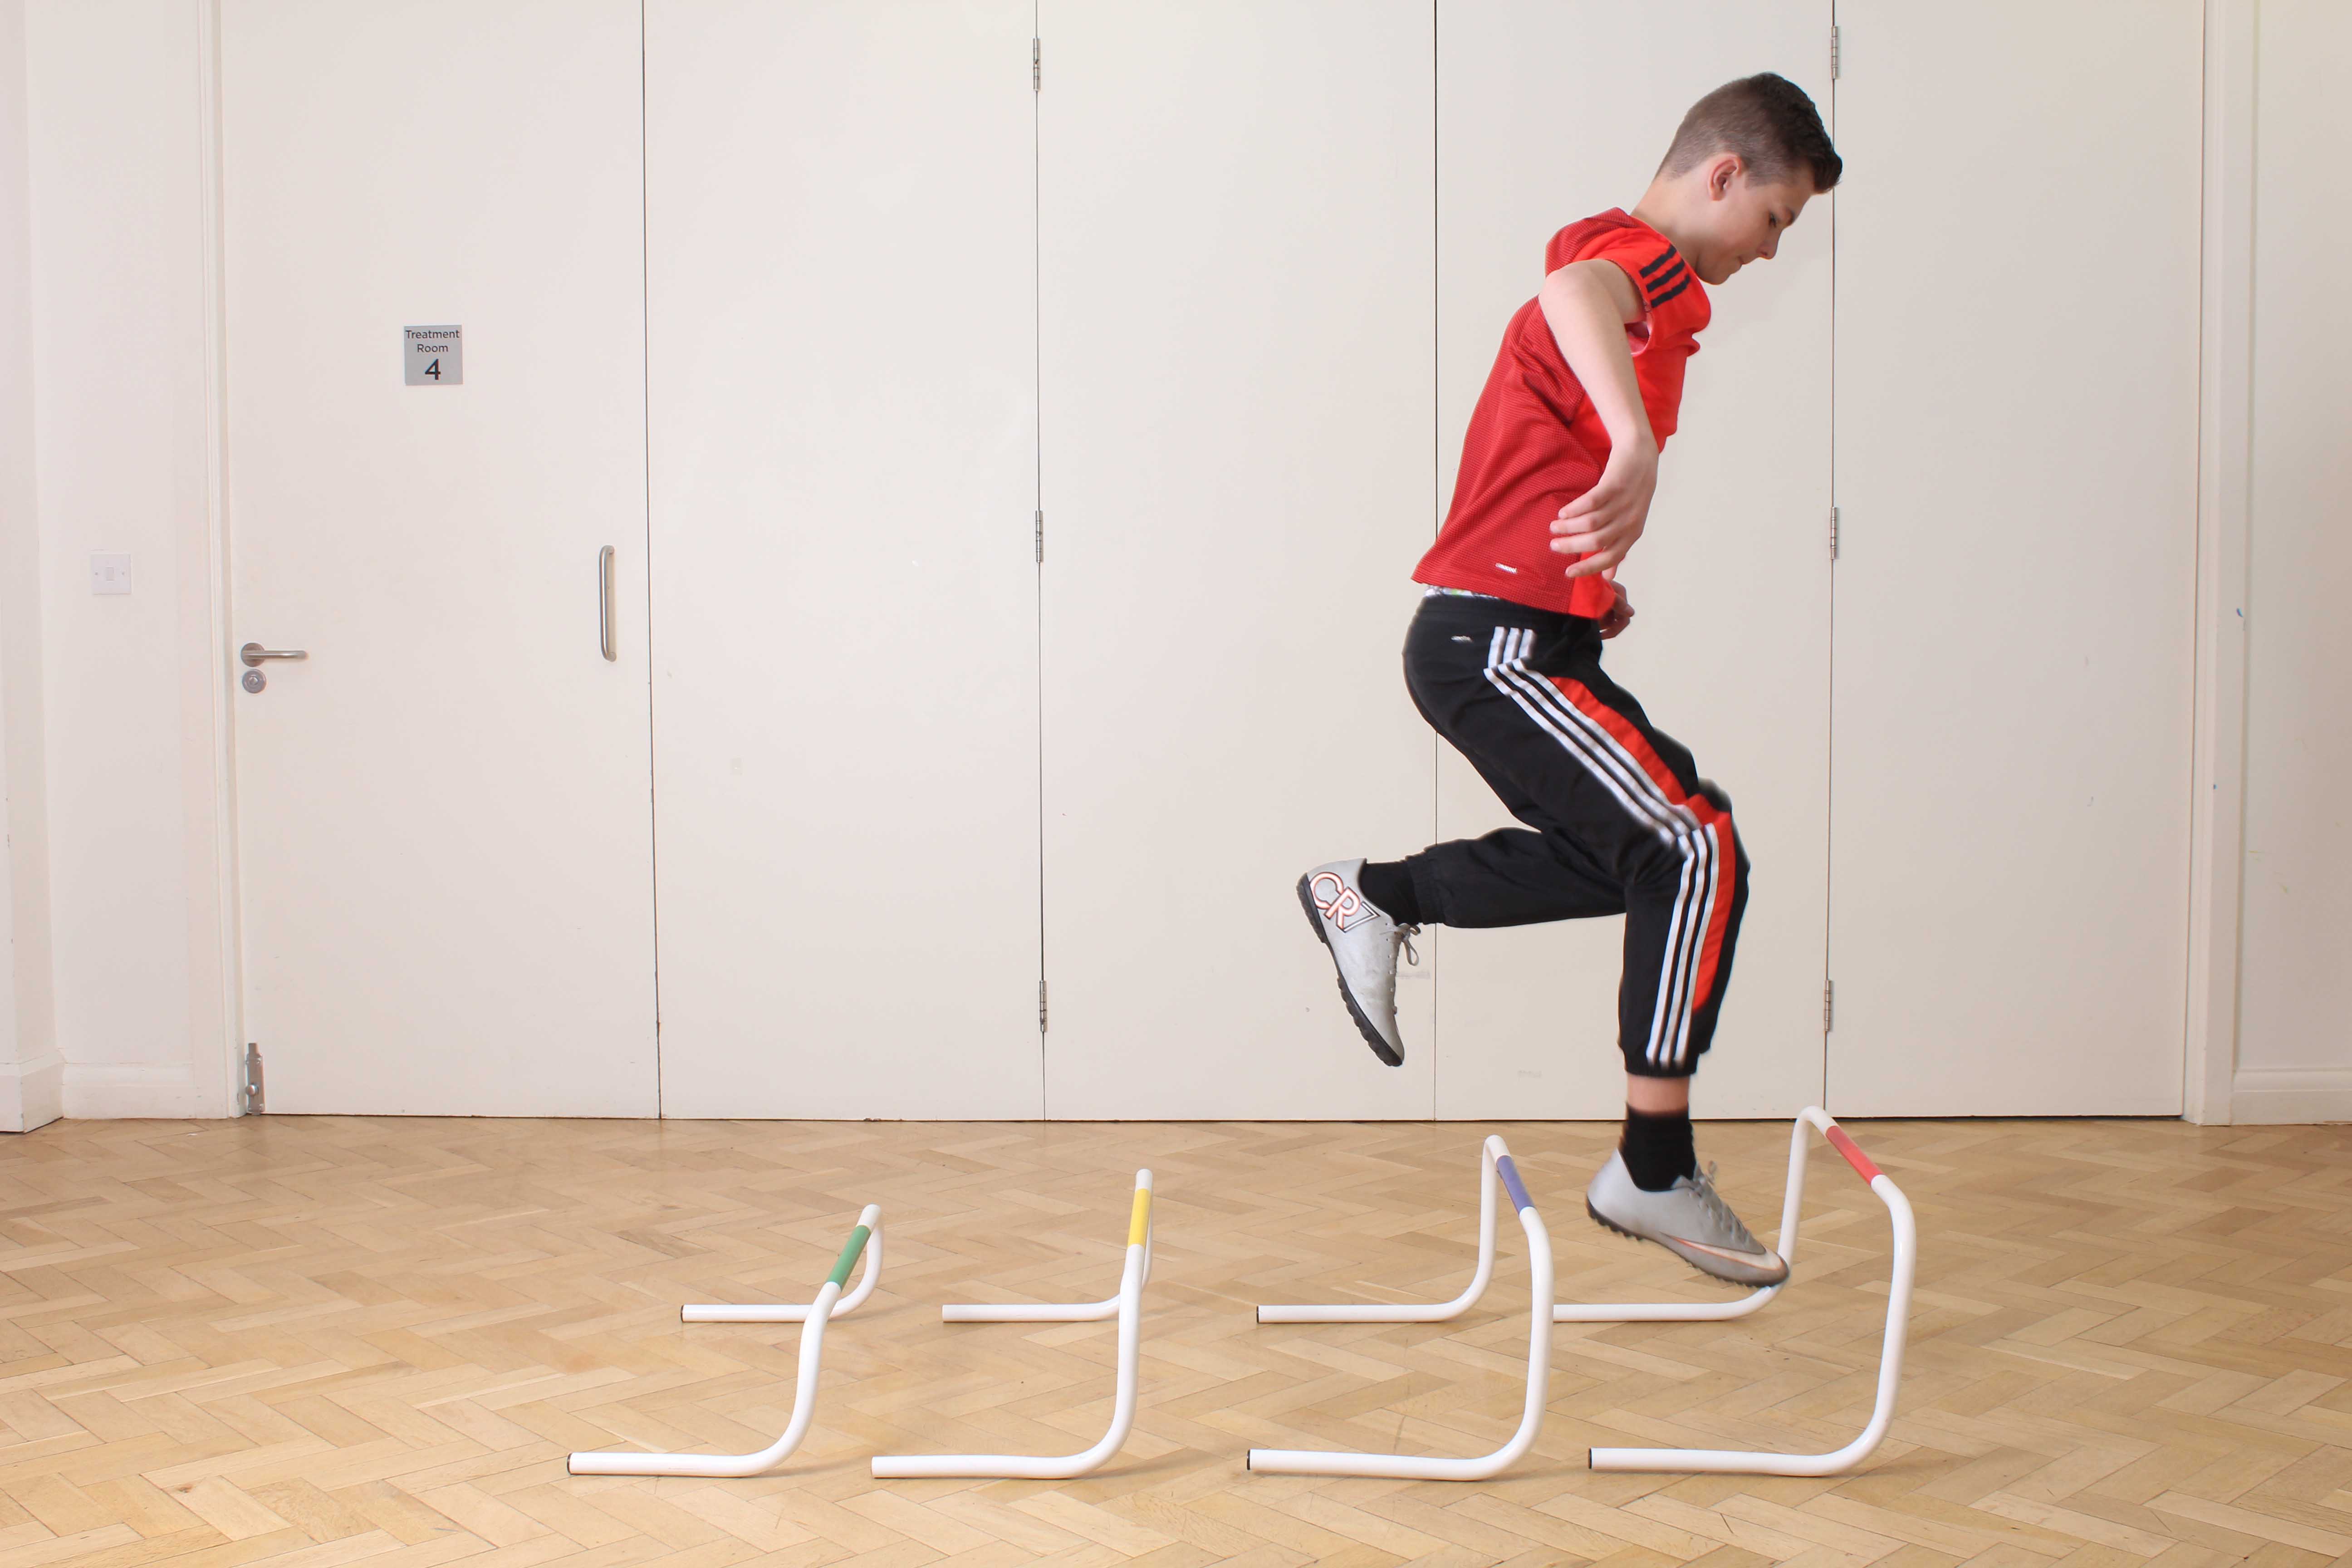 Mobility exercises using a Rolator frame supervised by a neurological physiotherapist